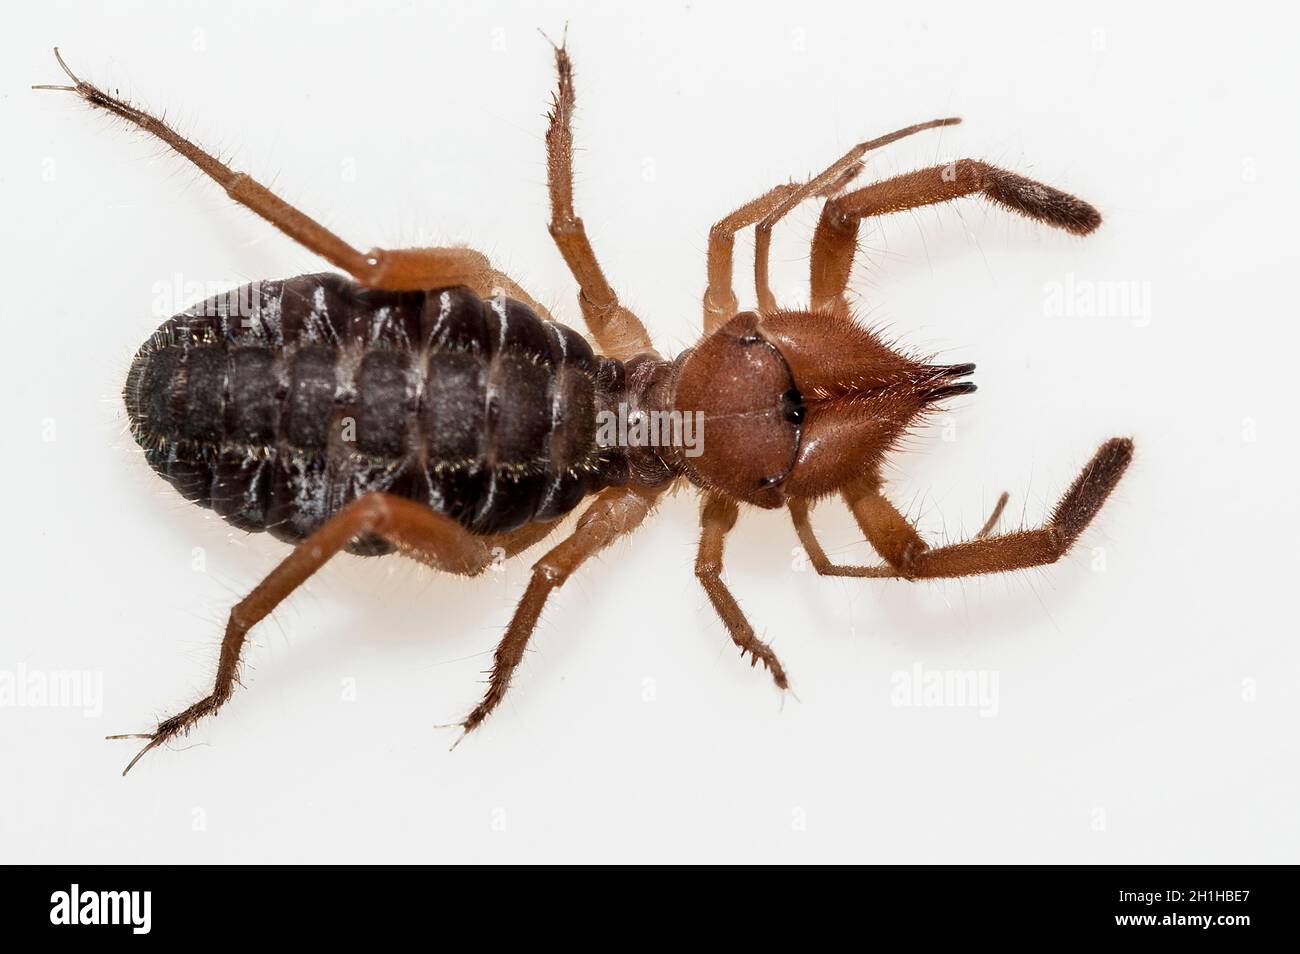 Solifuges, also called camel spiders, are a relatively large order of arachnids Stock Photo